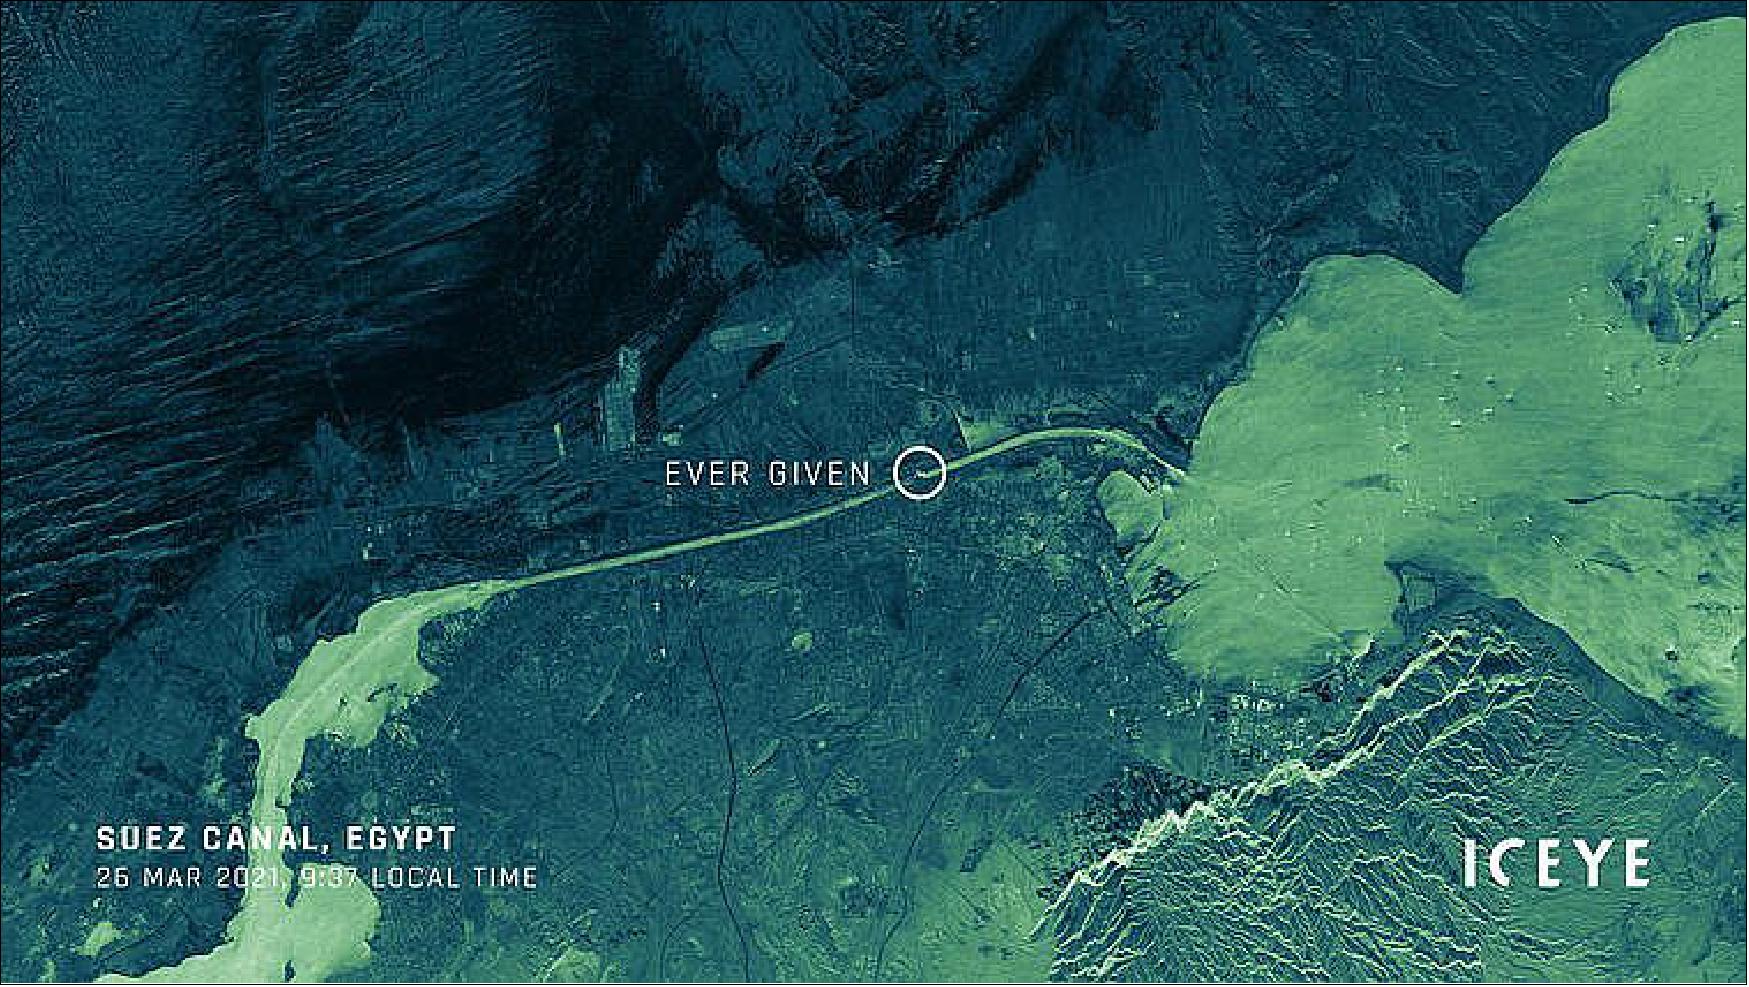 Figure 31: A Strip ICEYE radar satellite image of the Suez Canal from March 26, 2021, when the vessel Ever Given was blocking the waterway (image credit: ICEYE)